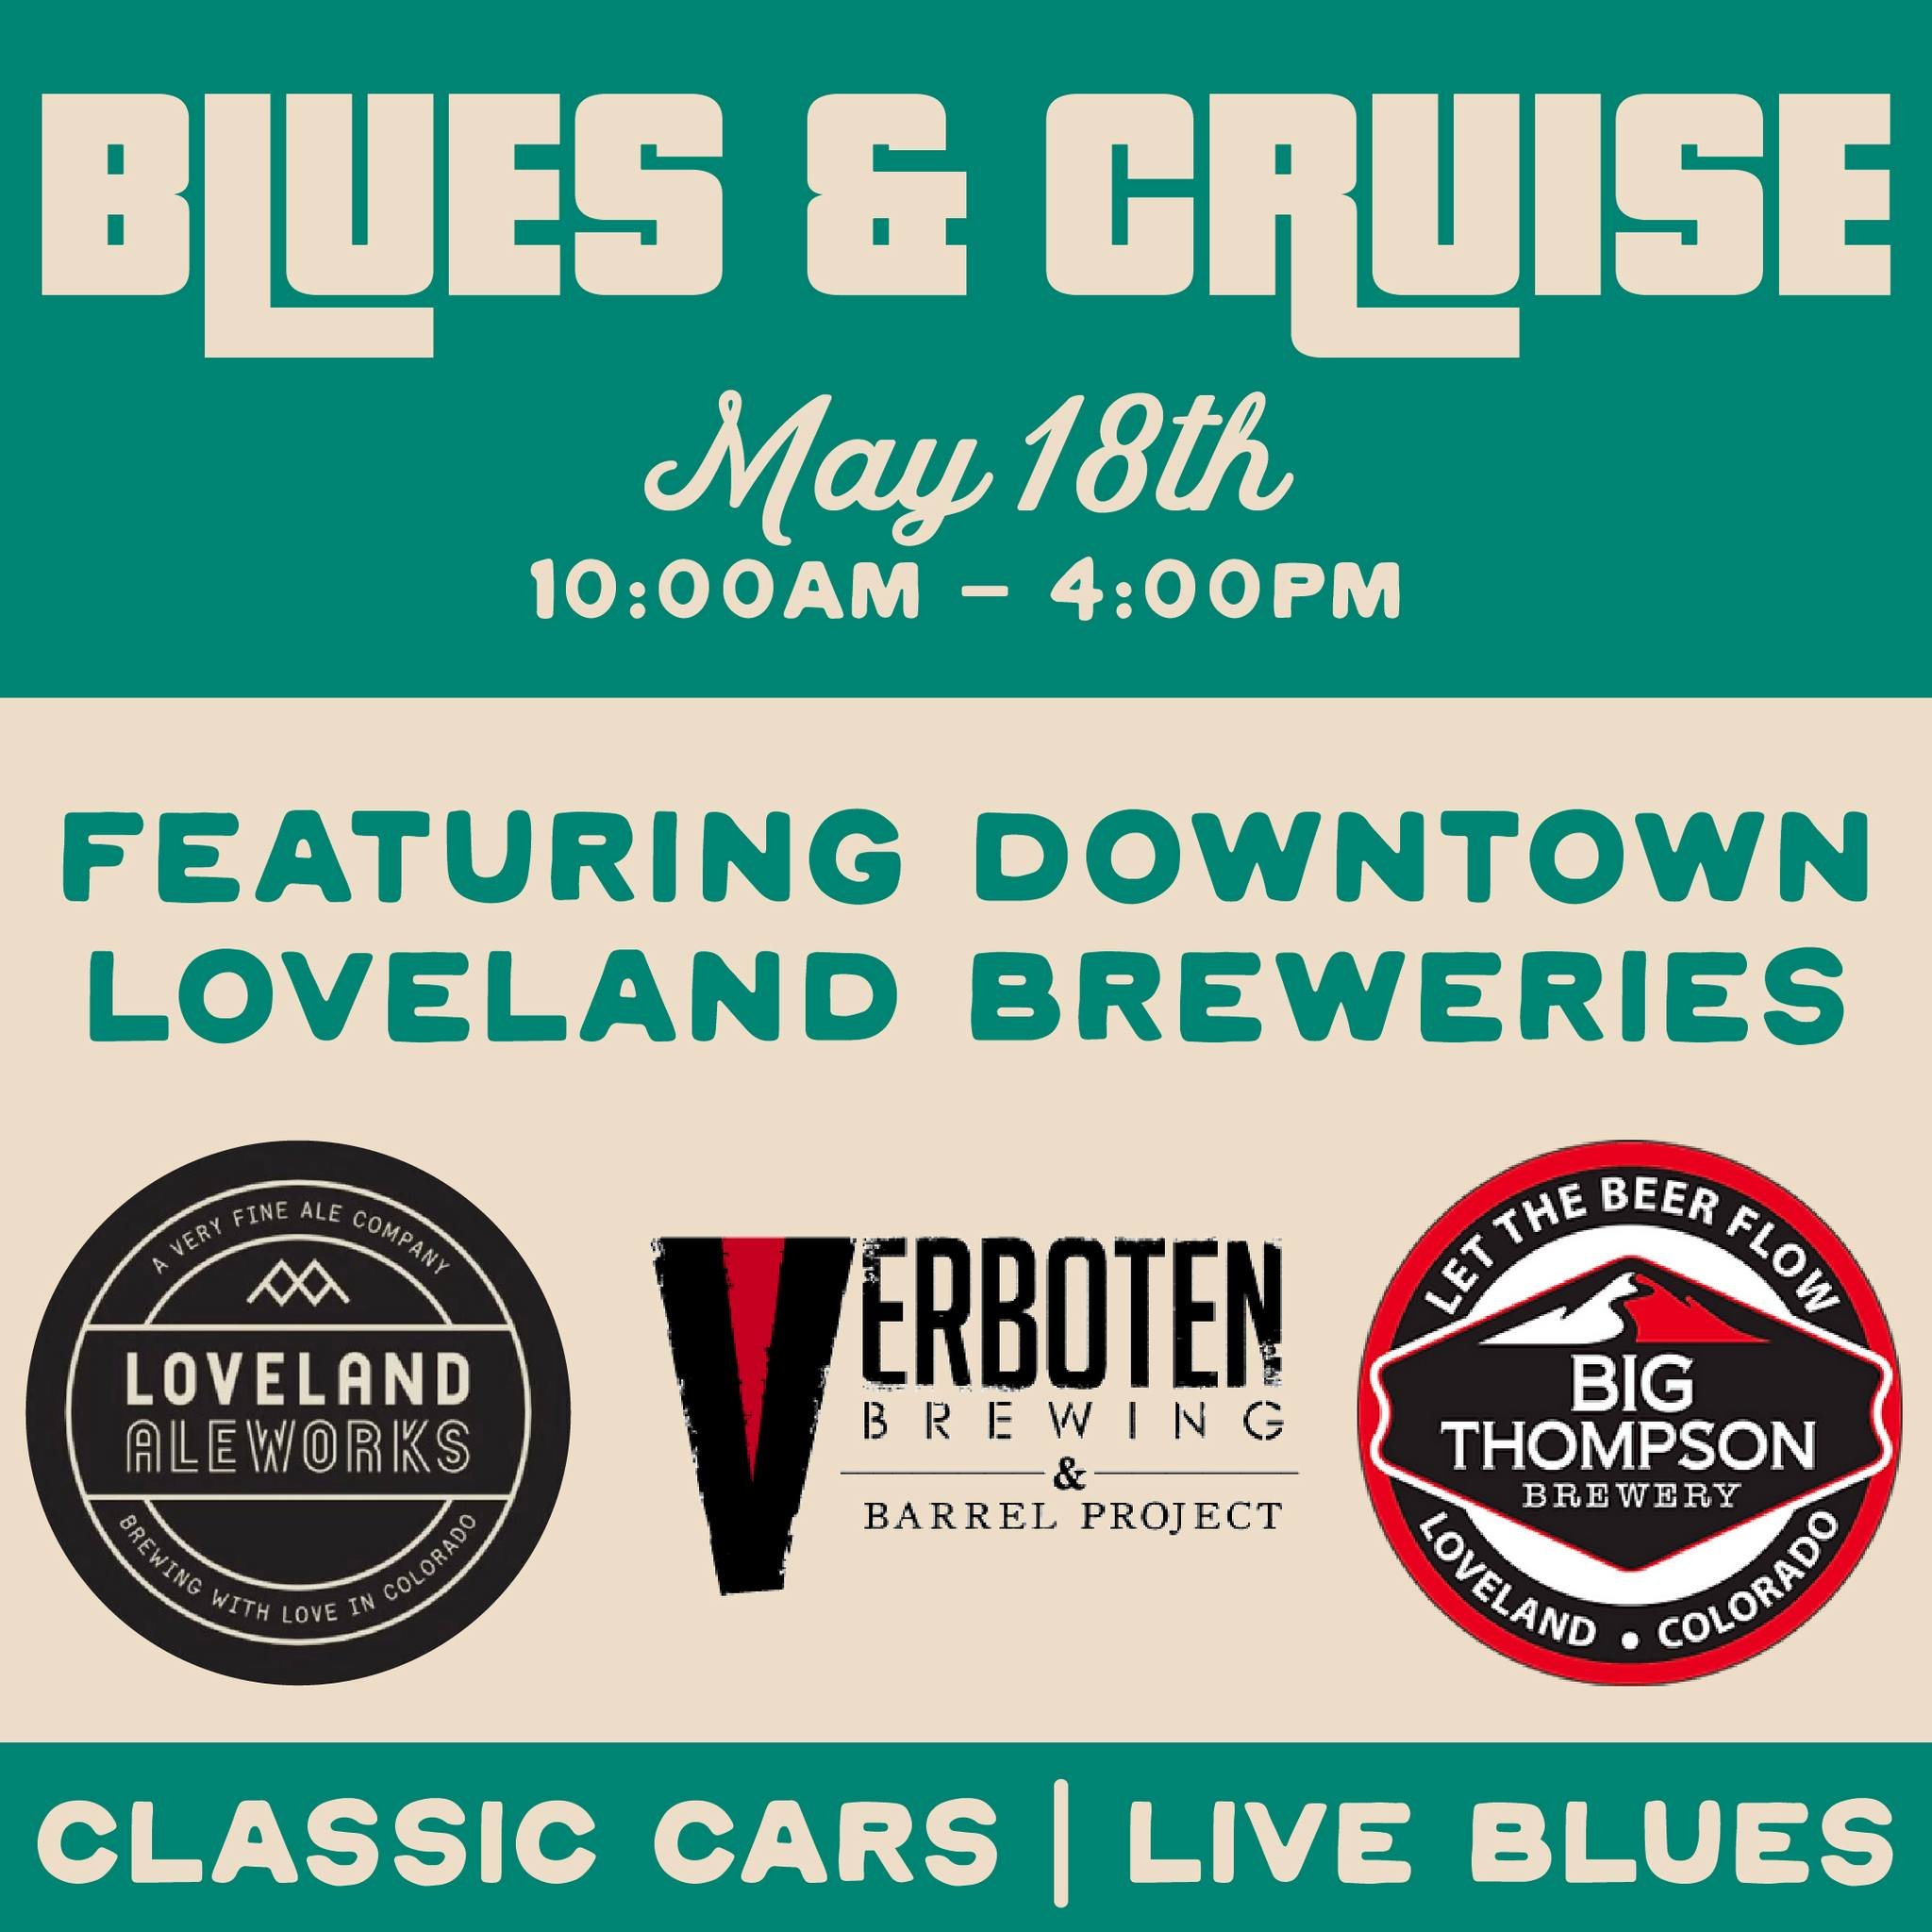 A few of Loveland's finest breweries will be pouring at our Blue &amp; Cruise event on Saturday, May 18th! Be sure to swing by Downtown Loveland for live blues music and a classic car show. Open to the public and FREE to attend!
@lovelandaleworks 
@v